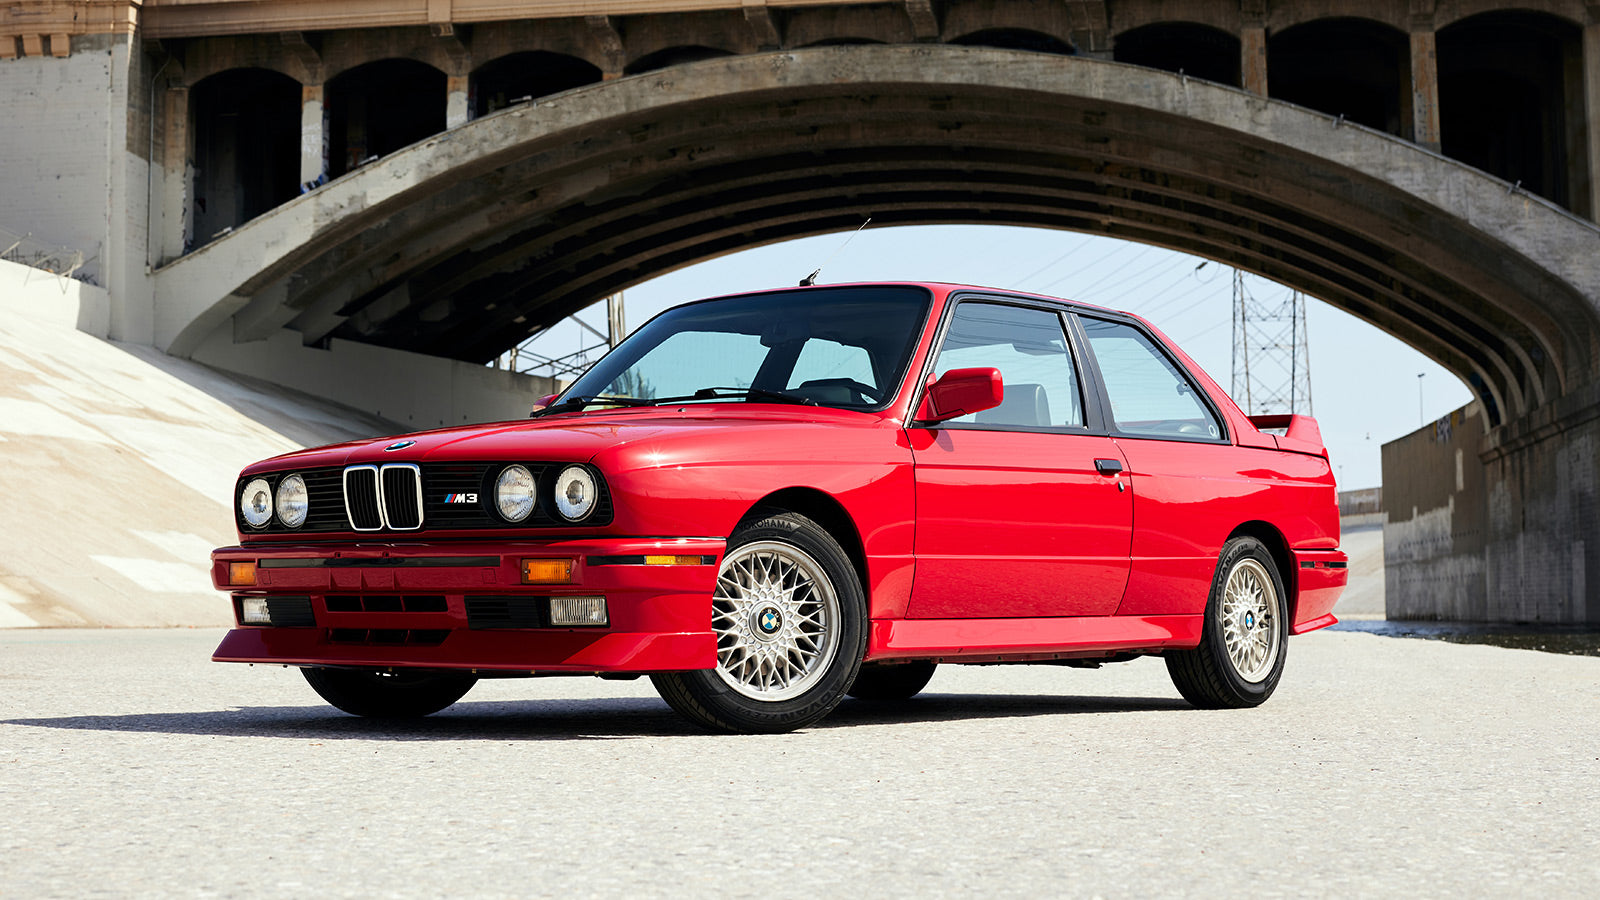 Petrolhead Corner - Paying Tribute to the iconic BMW E30 M3